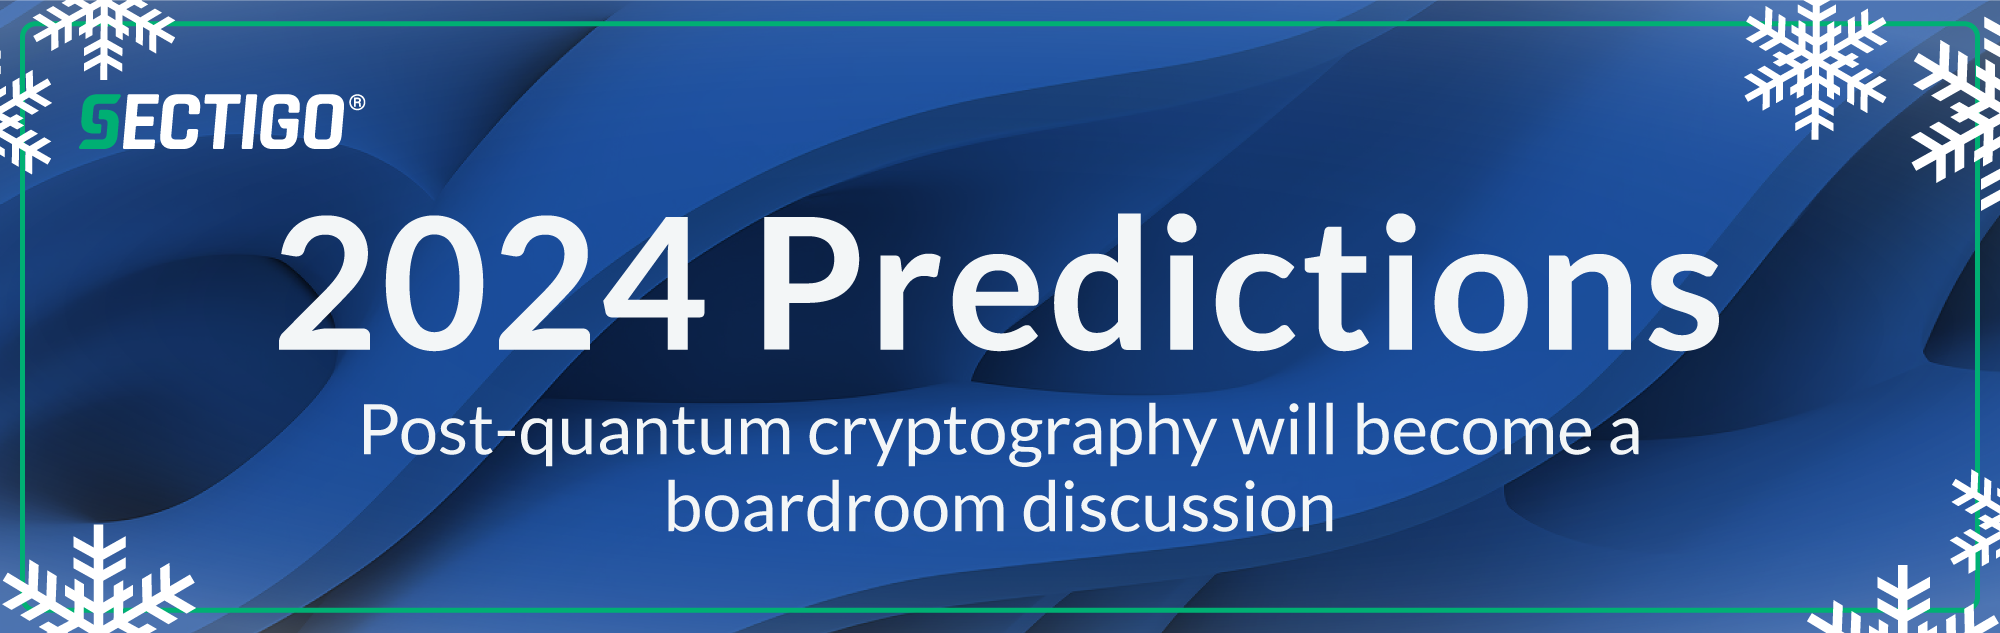 Prediction: Post-quantum cryptography enters the boardroom